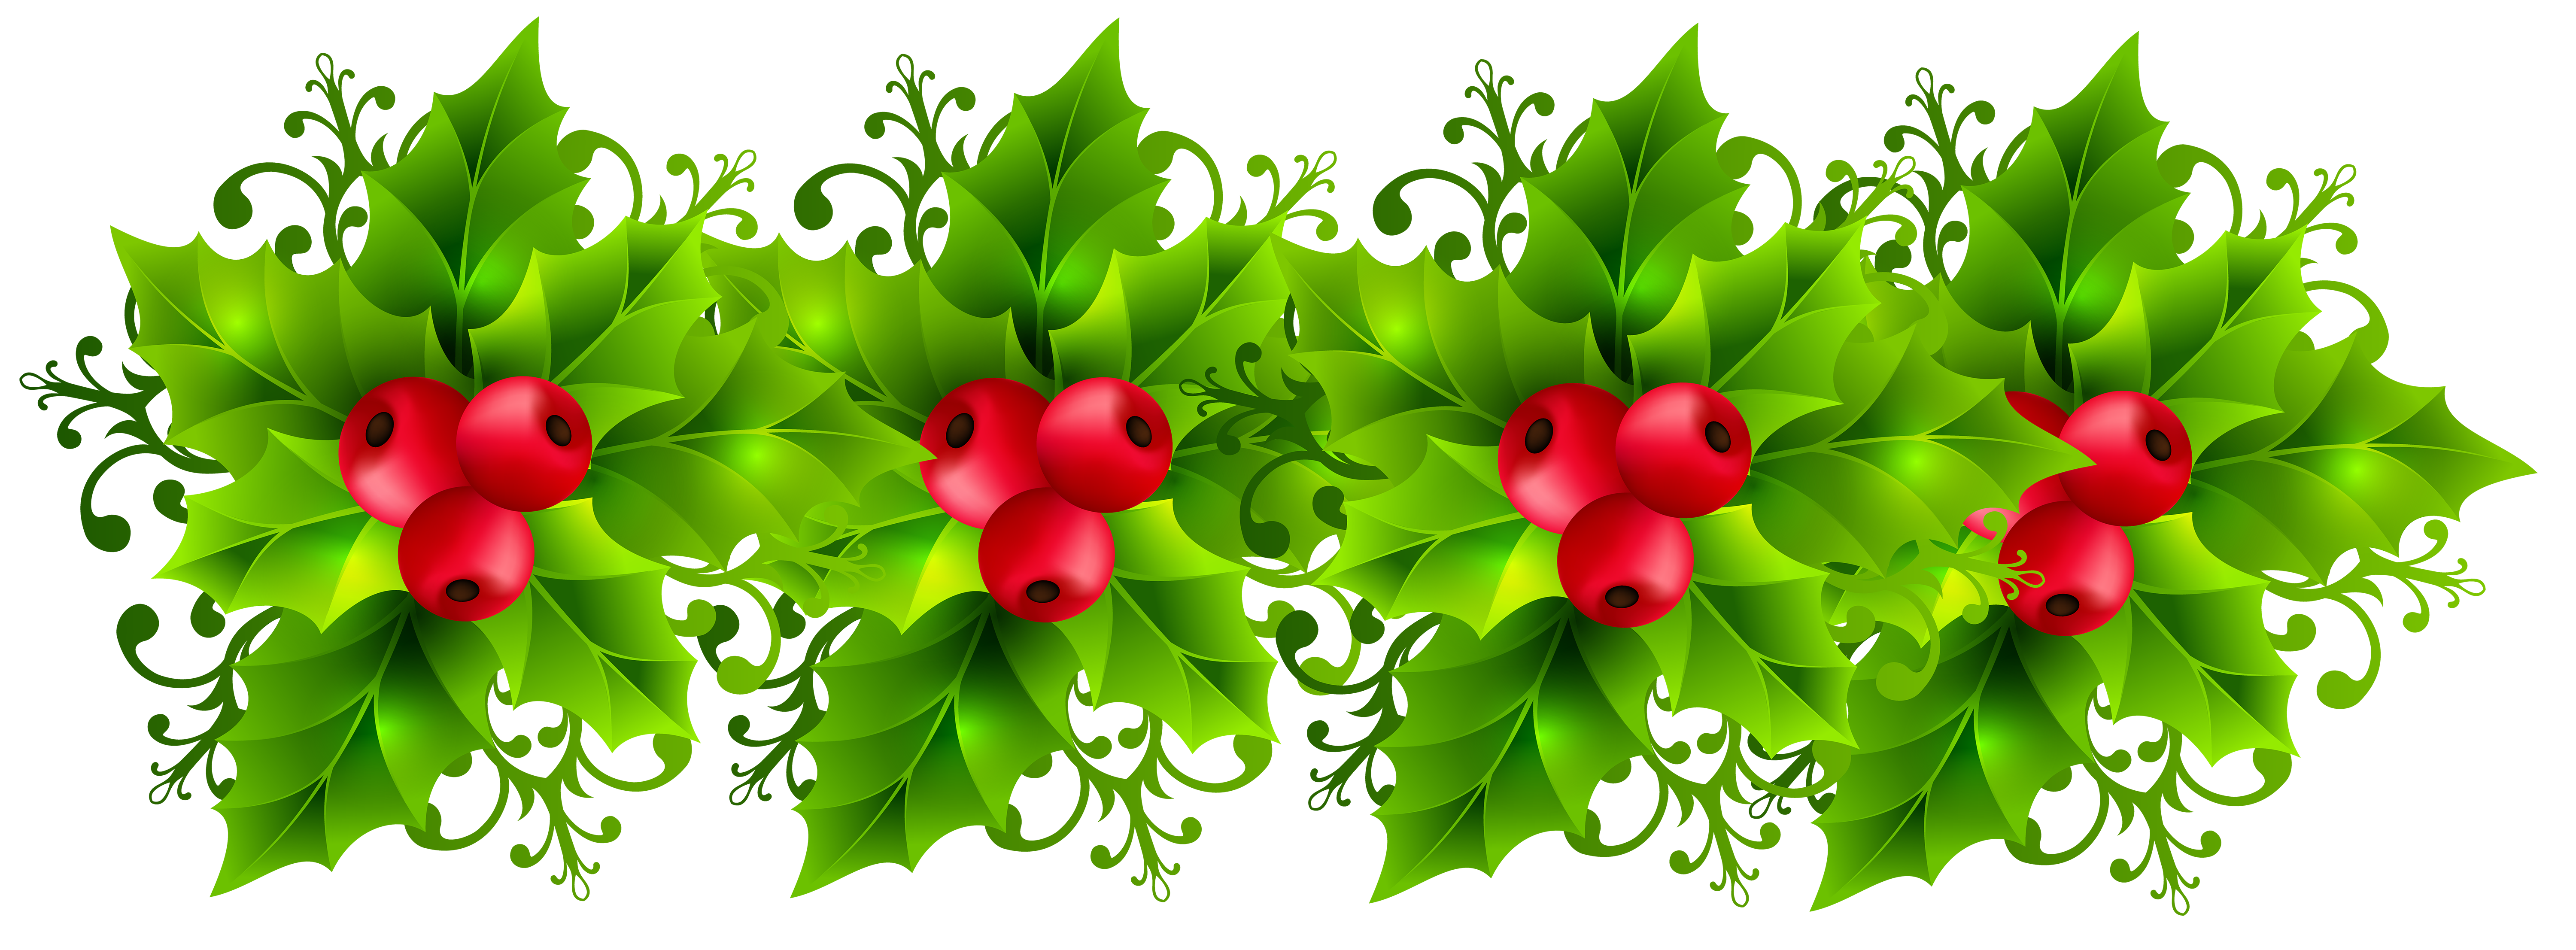 Christmas holly garland transparent. Floral clipart greenery